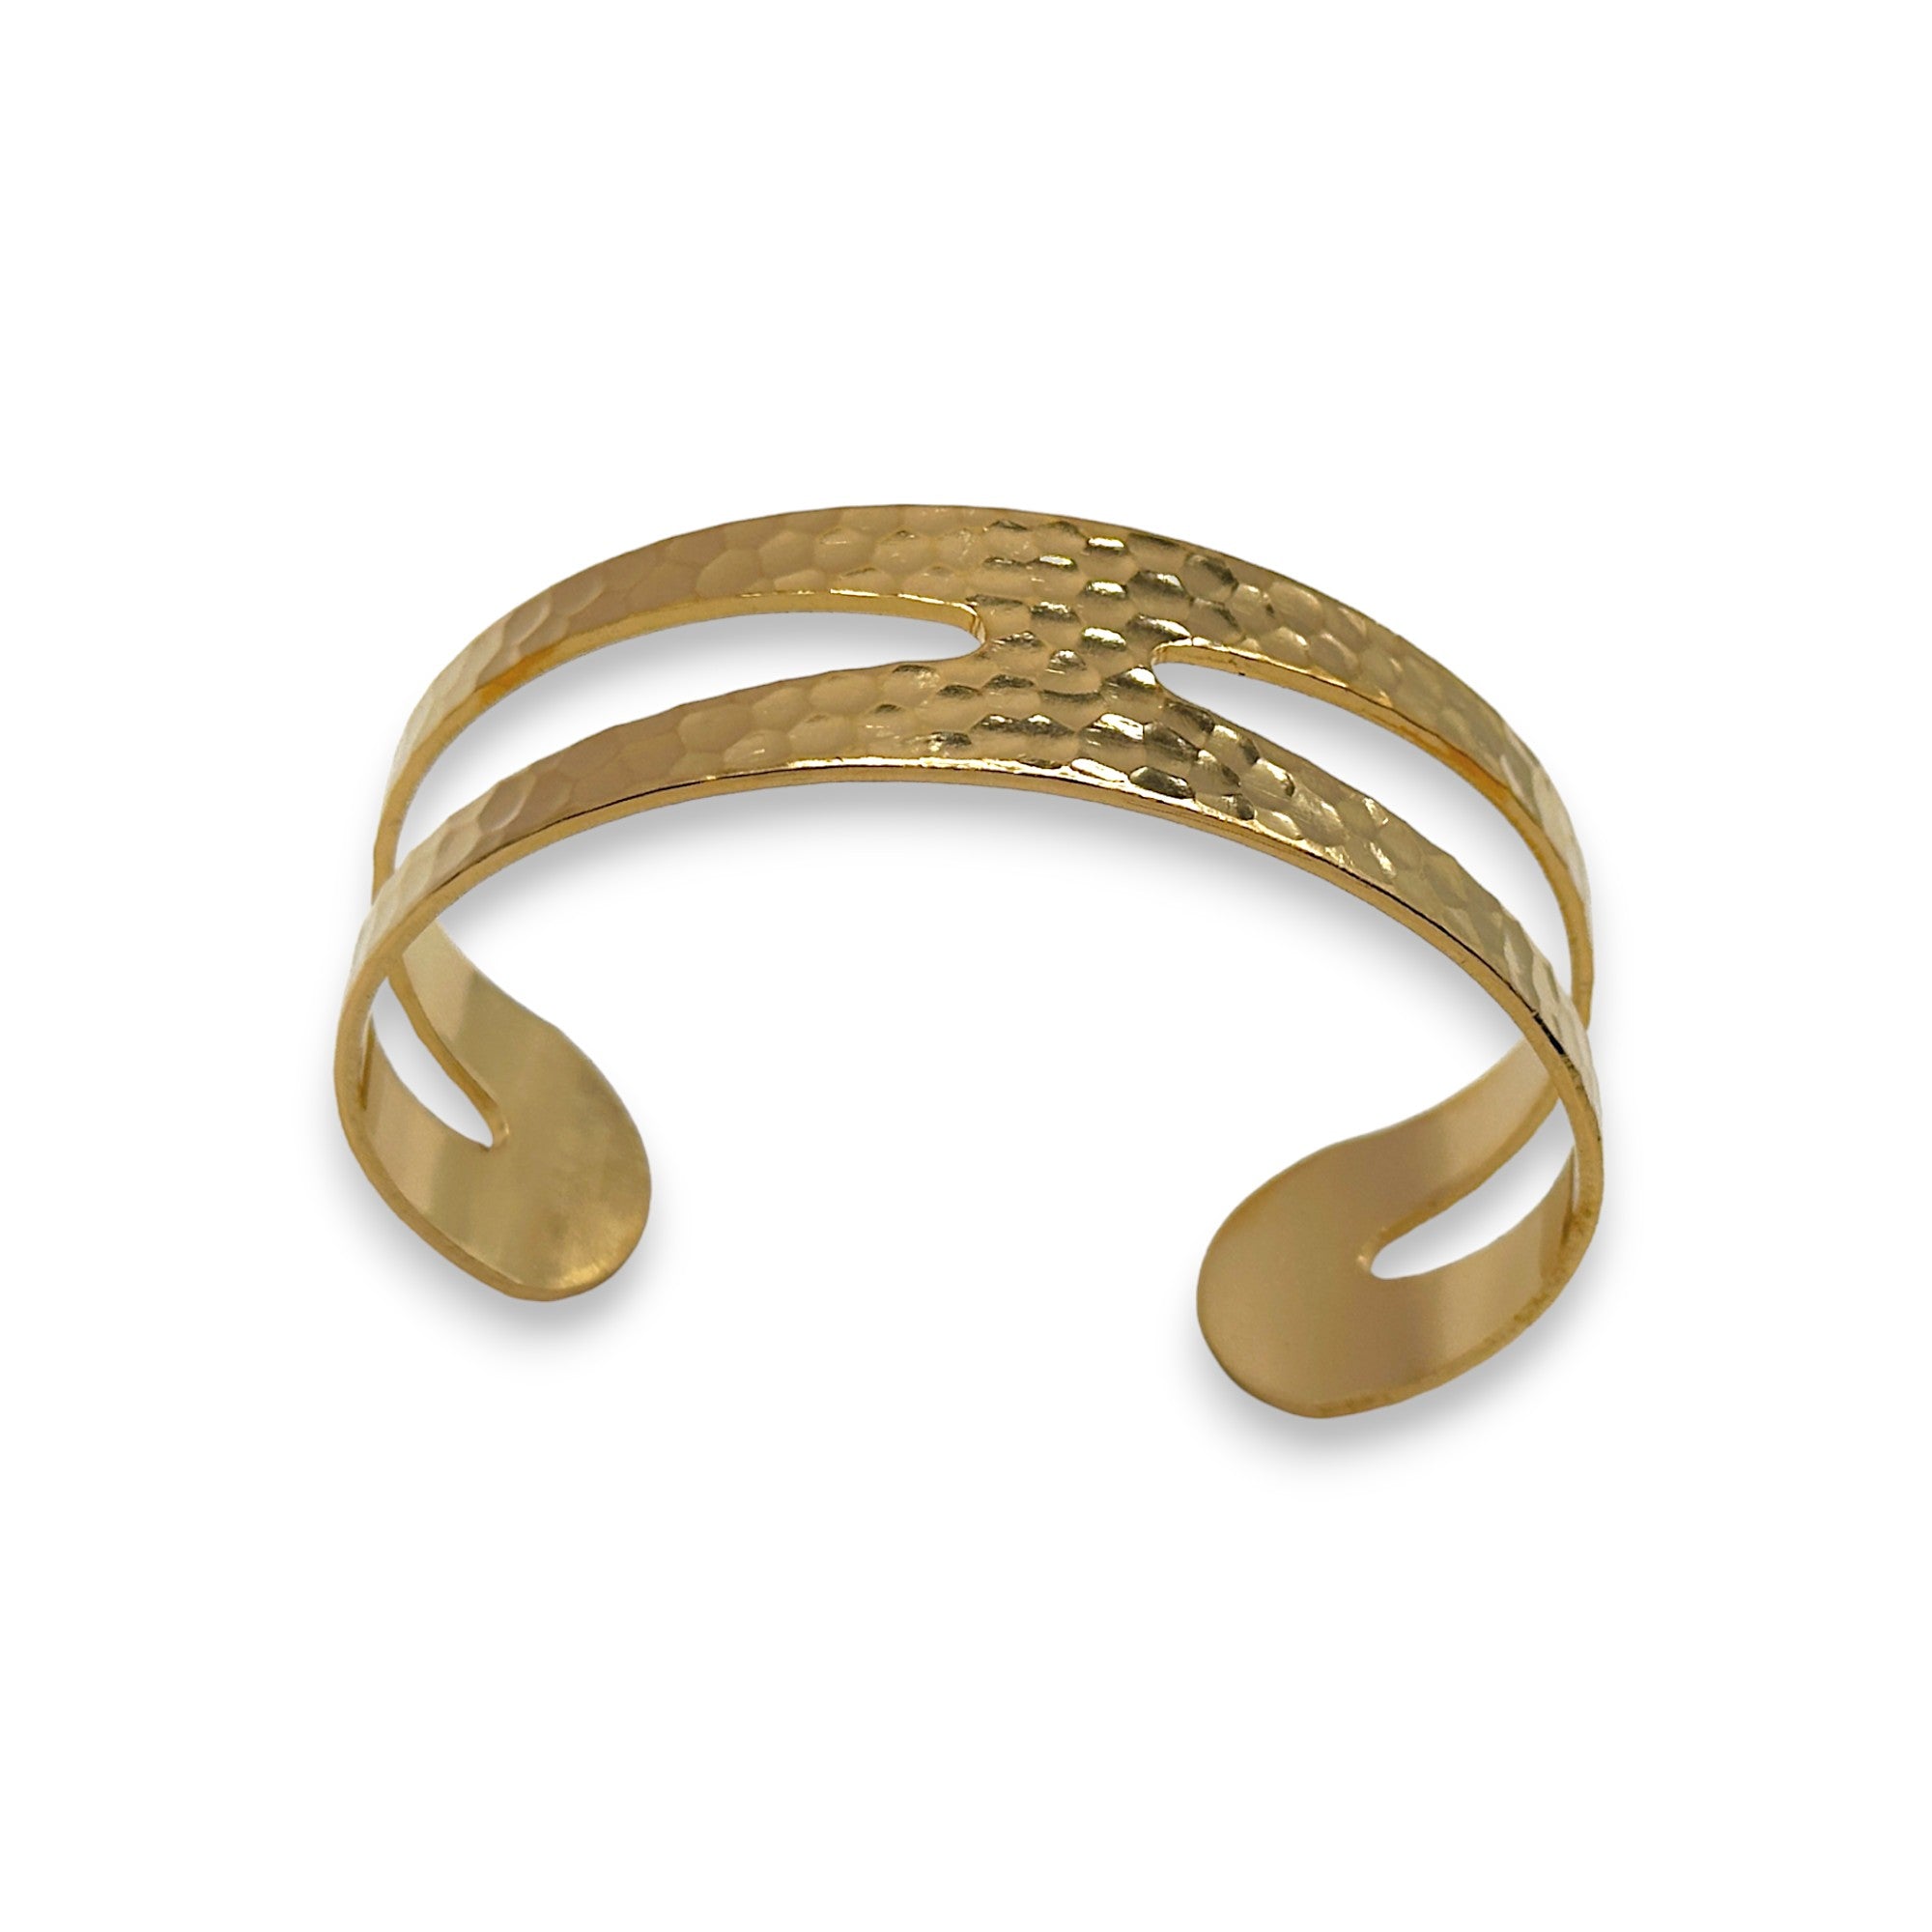 Double Cutout Hammered Cuff Bracelet